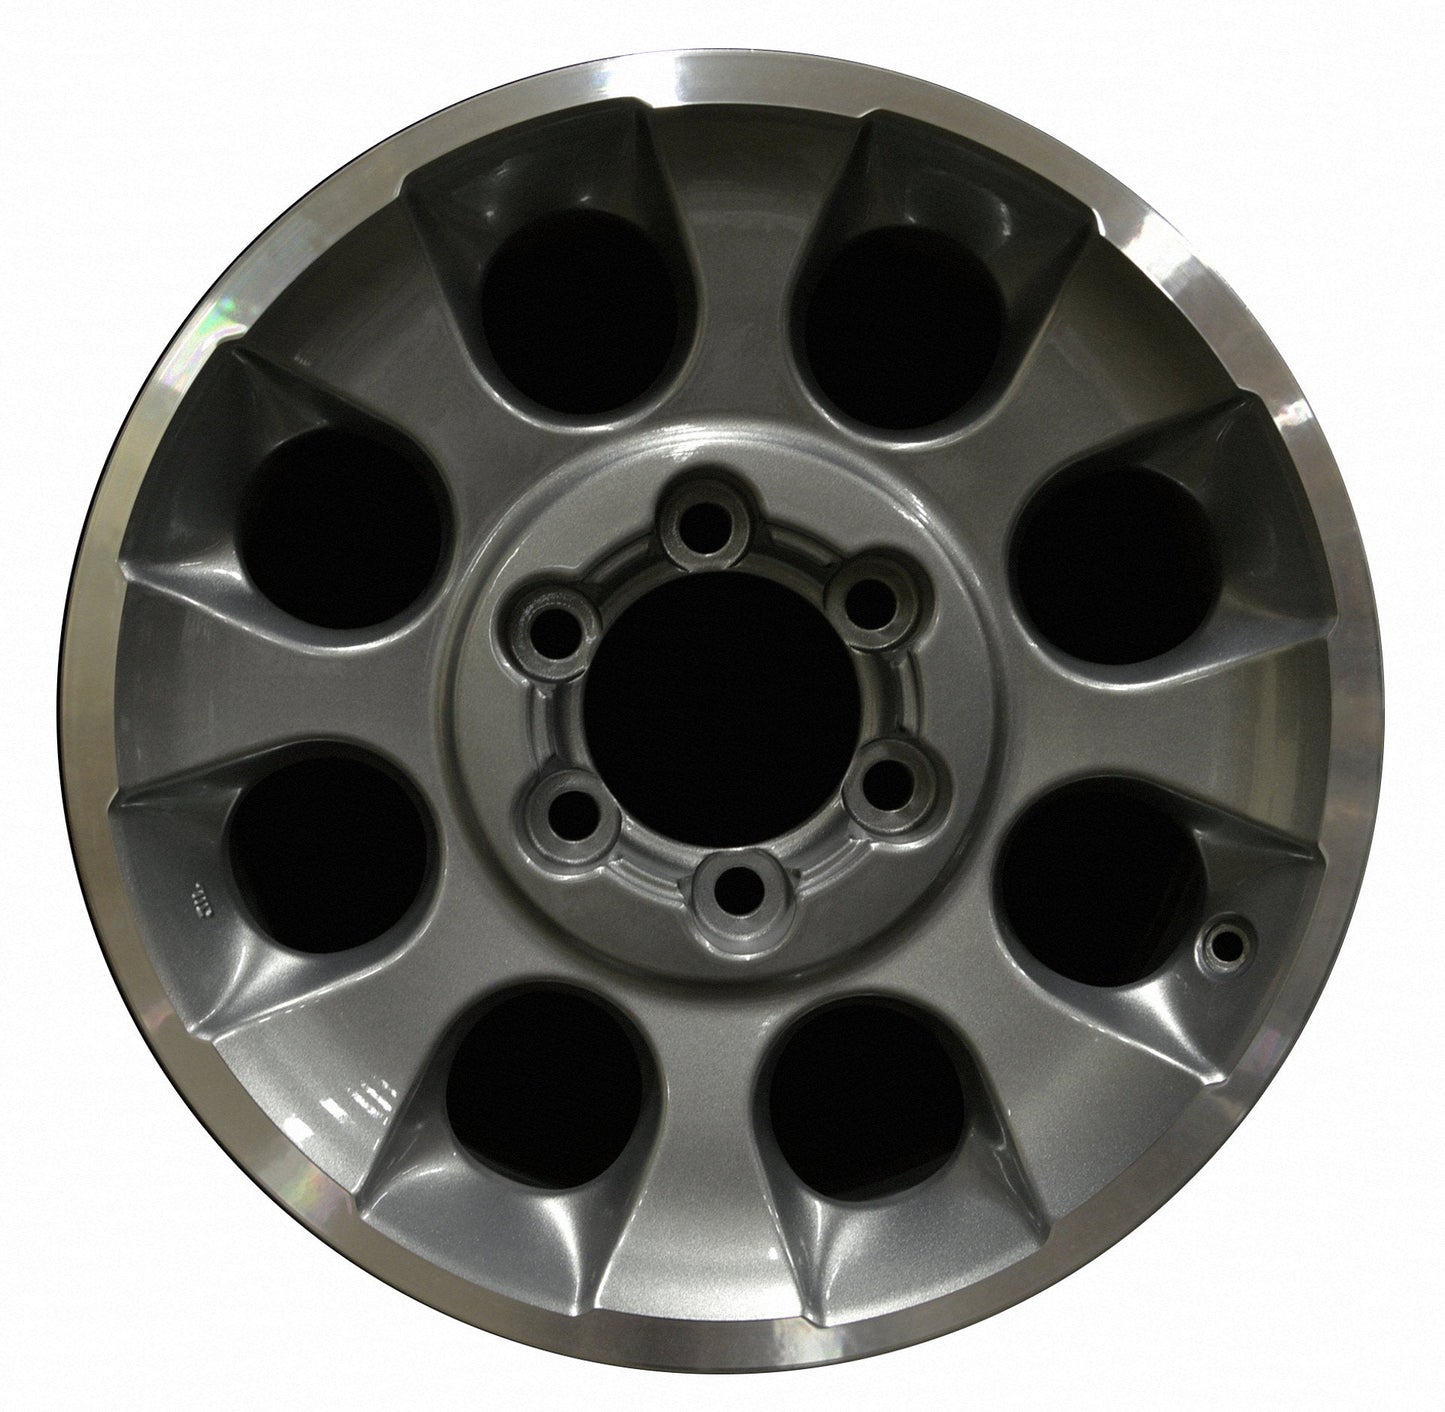 Toyota 4 Runner  2010, 2011, 2012, 2013 Factory OEM Car Wheel Size 17x7.5 Alloy WAO.69579.LC43.FC